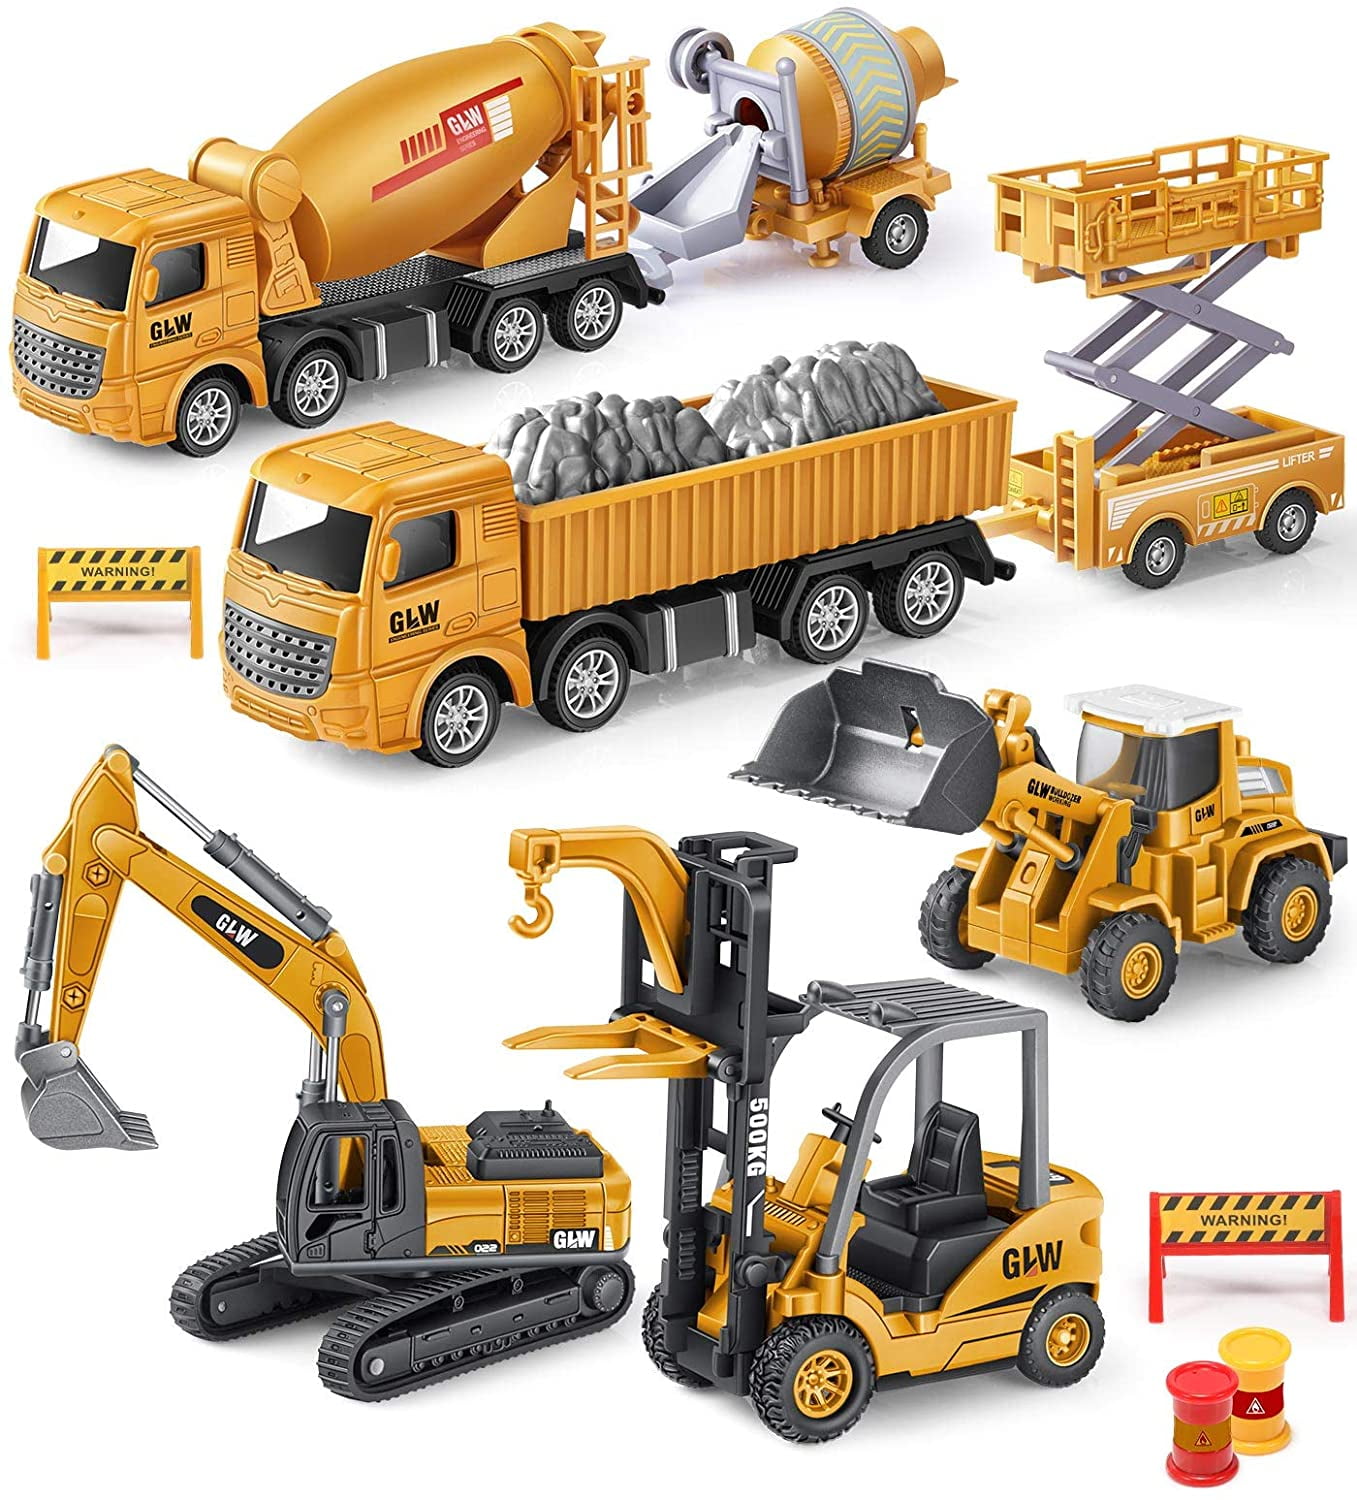 Dump 4 Pack Push & Go Engineering Vehicles Cars with Excavator Preschool Educational Learning Toy Gift for Kids Toddlers Construction Trucks Toy Cars for Boys 3 4 5 6 7 8 Years Old Crane Mixer 